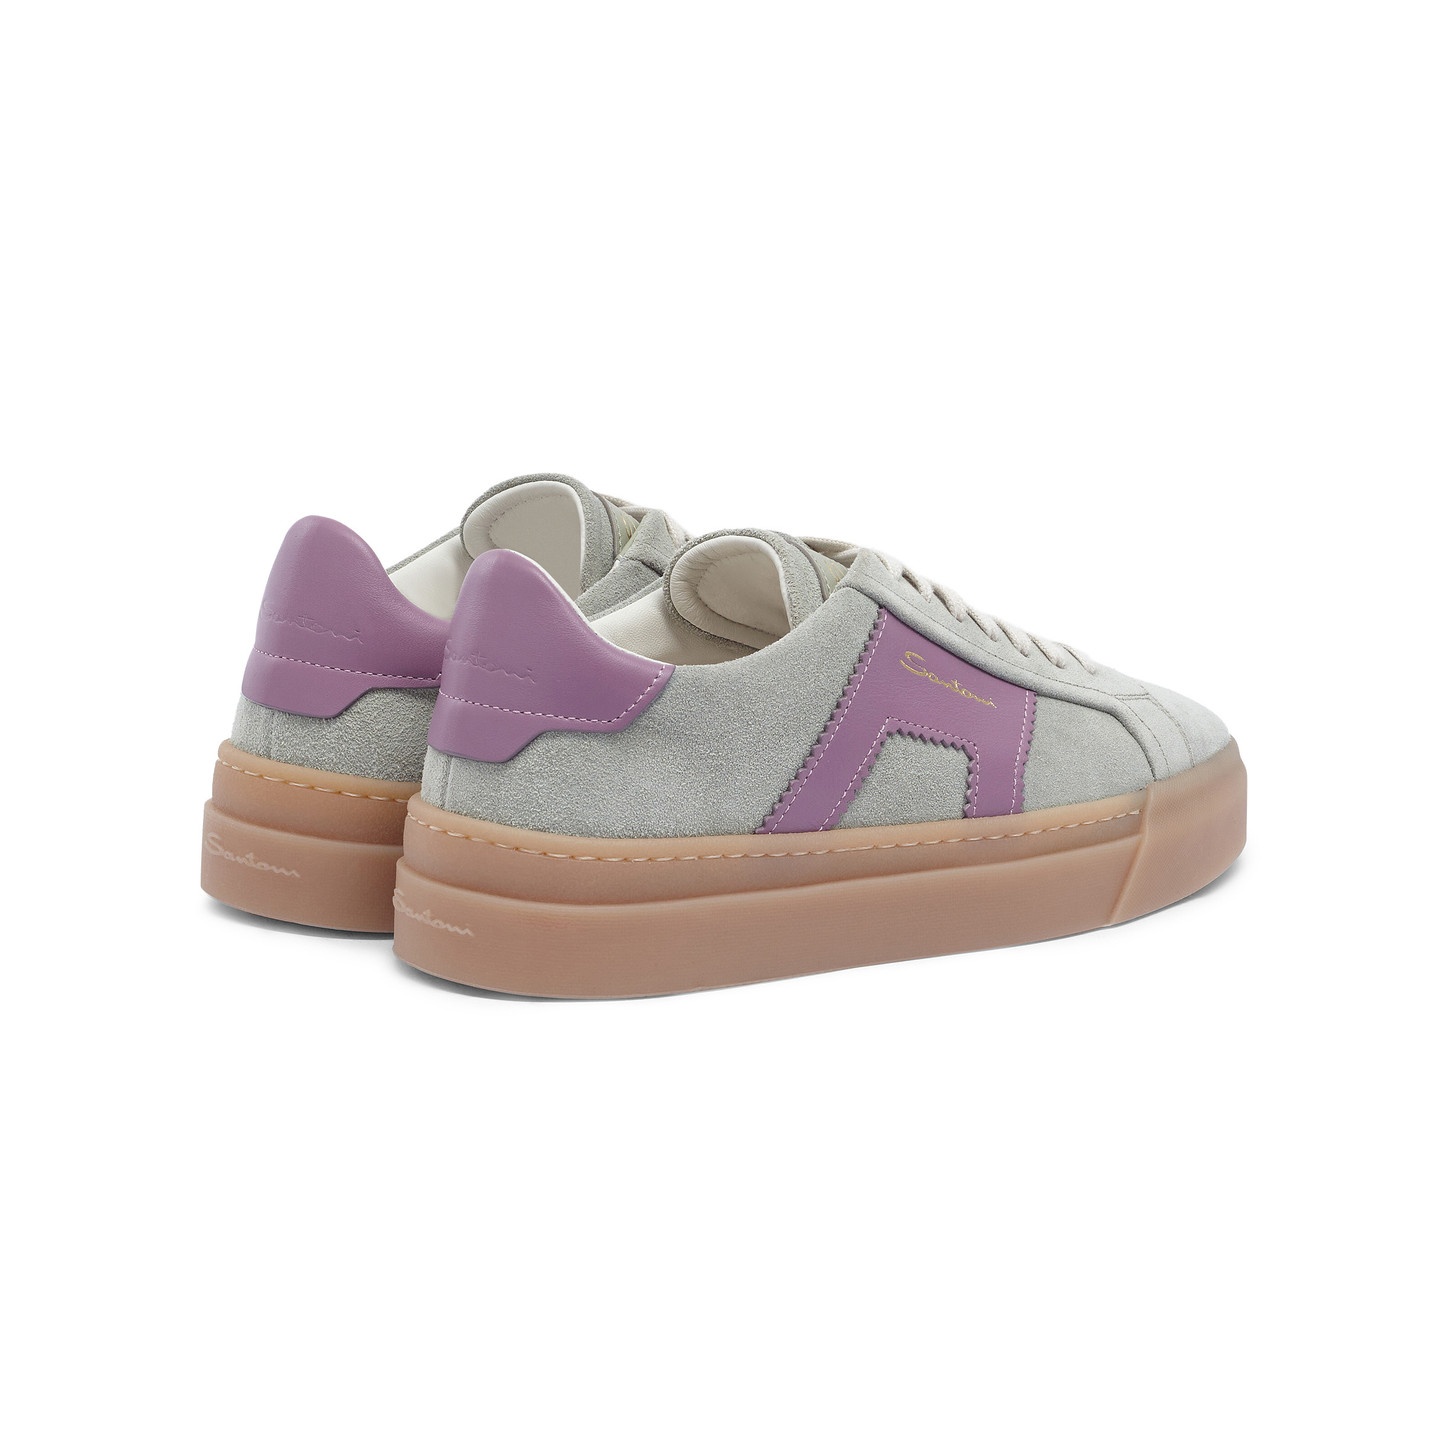 Women's green and purple suede and leather double buckle sneaker - 4